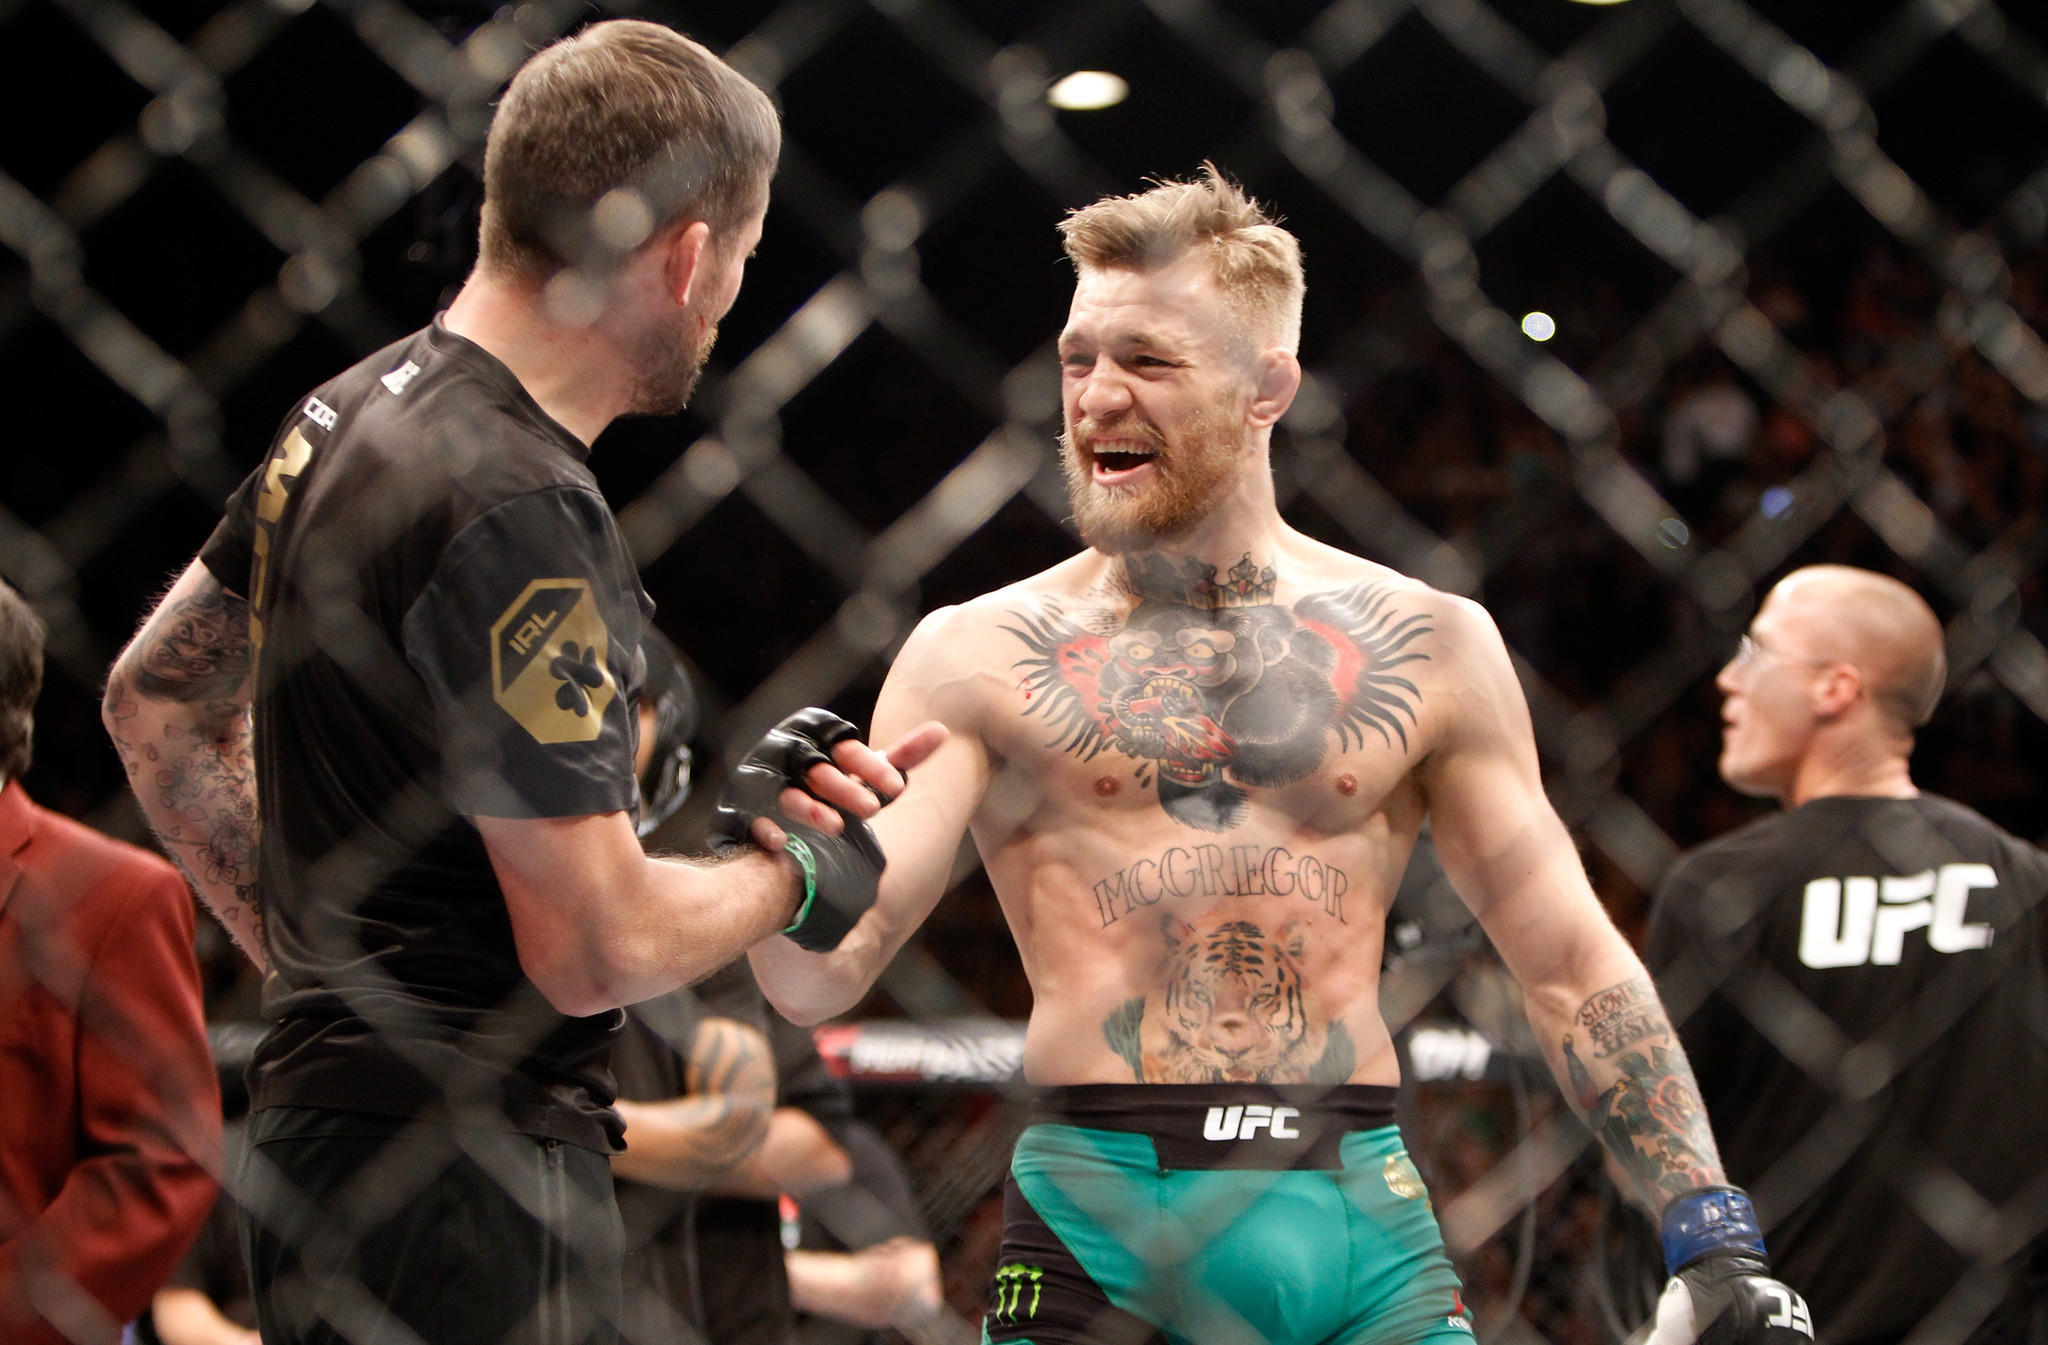 Conor McGregor has options in next fight after record knockout of Jose Aldo - LA Times